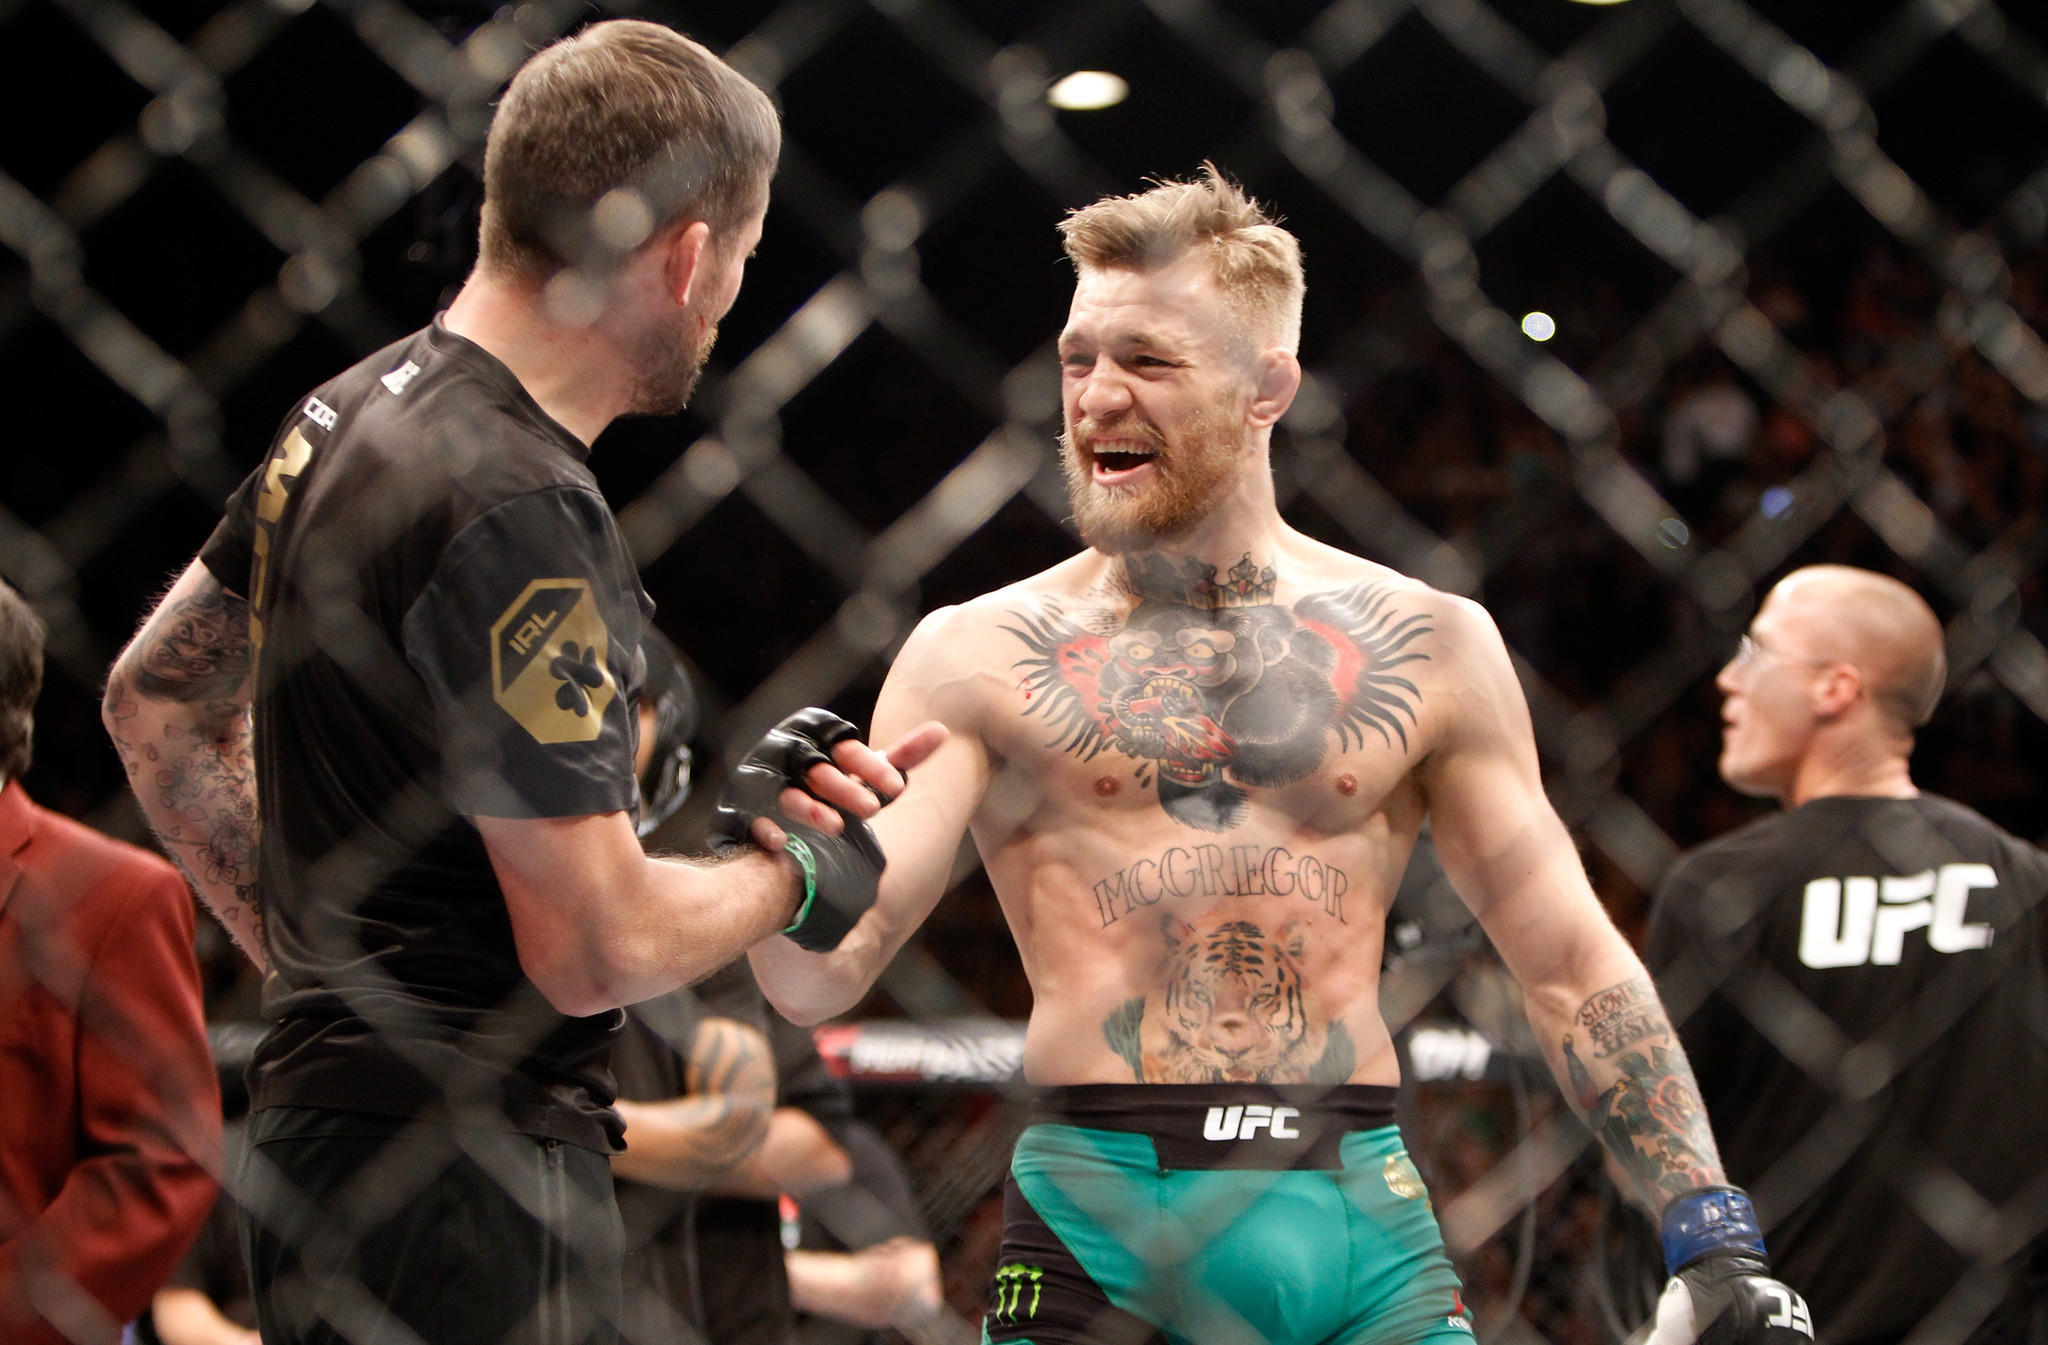 Conor McGregor has options in next fight after record knockout of Jose Aldo - LA Times